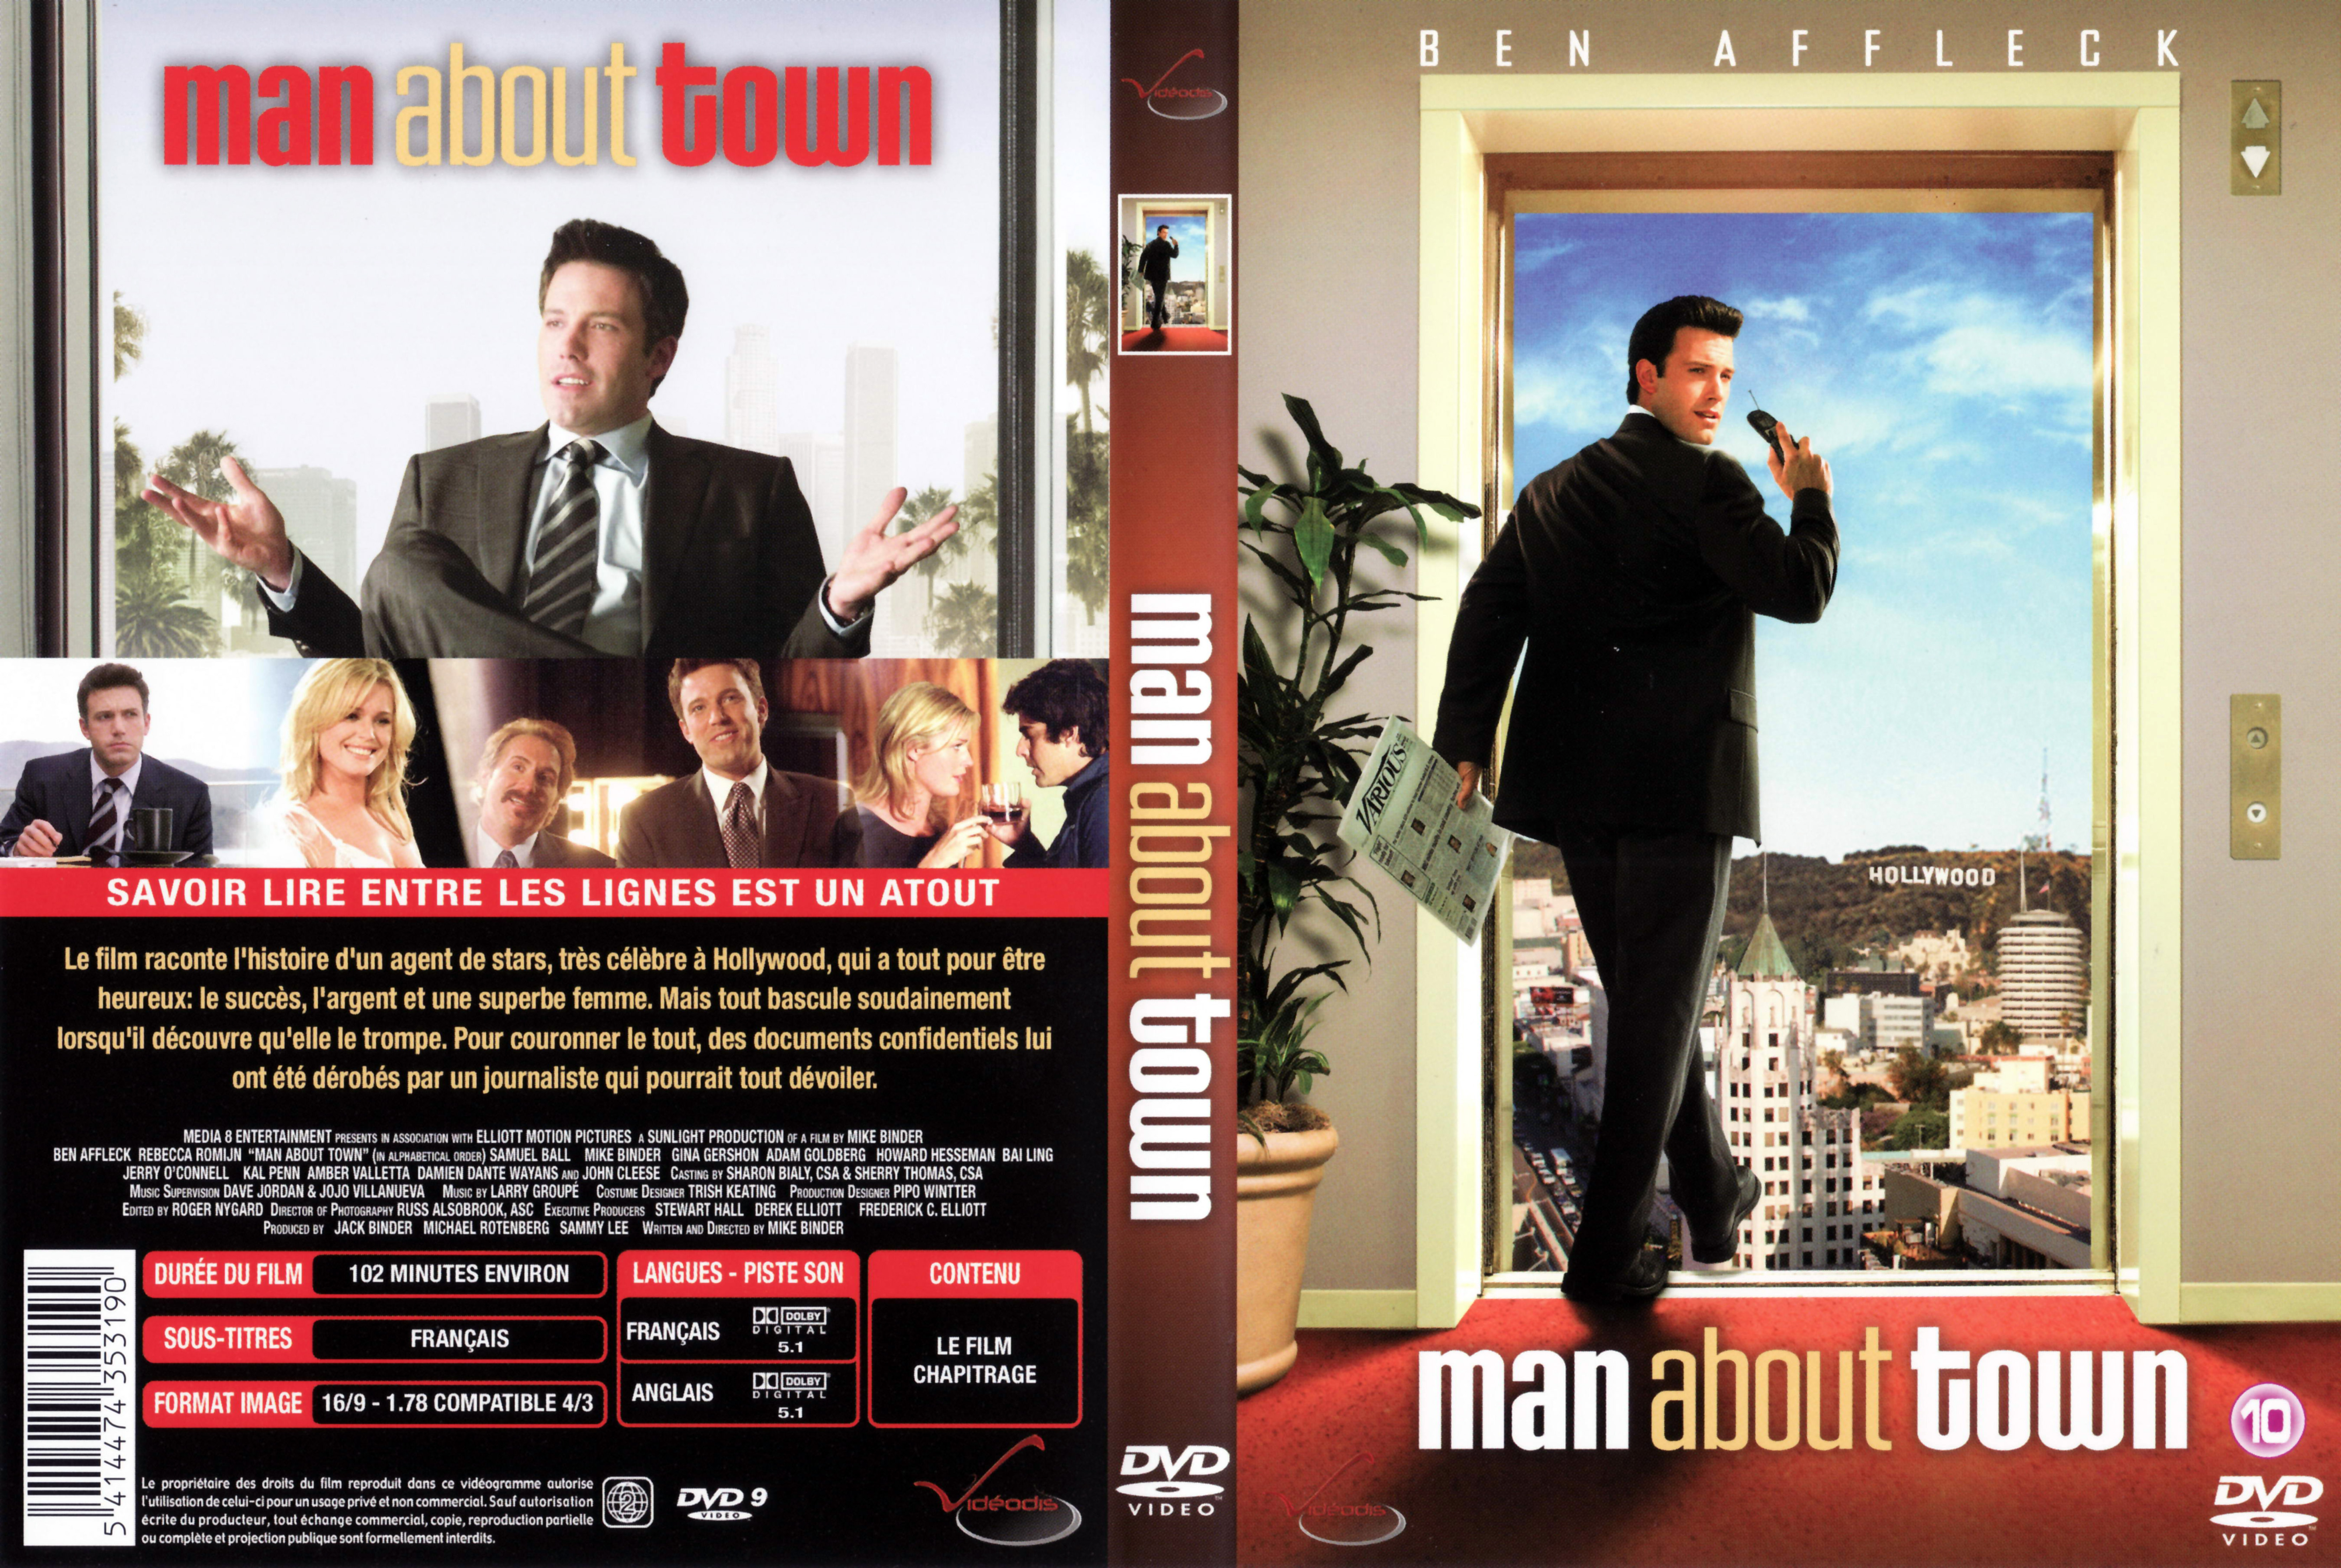 Jaquette DVD Man about town